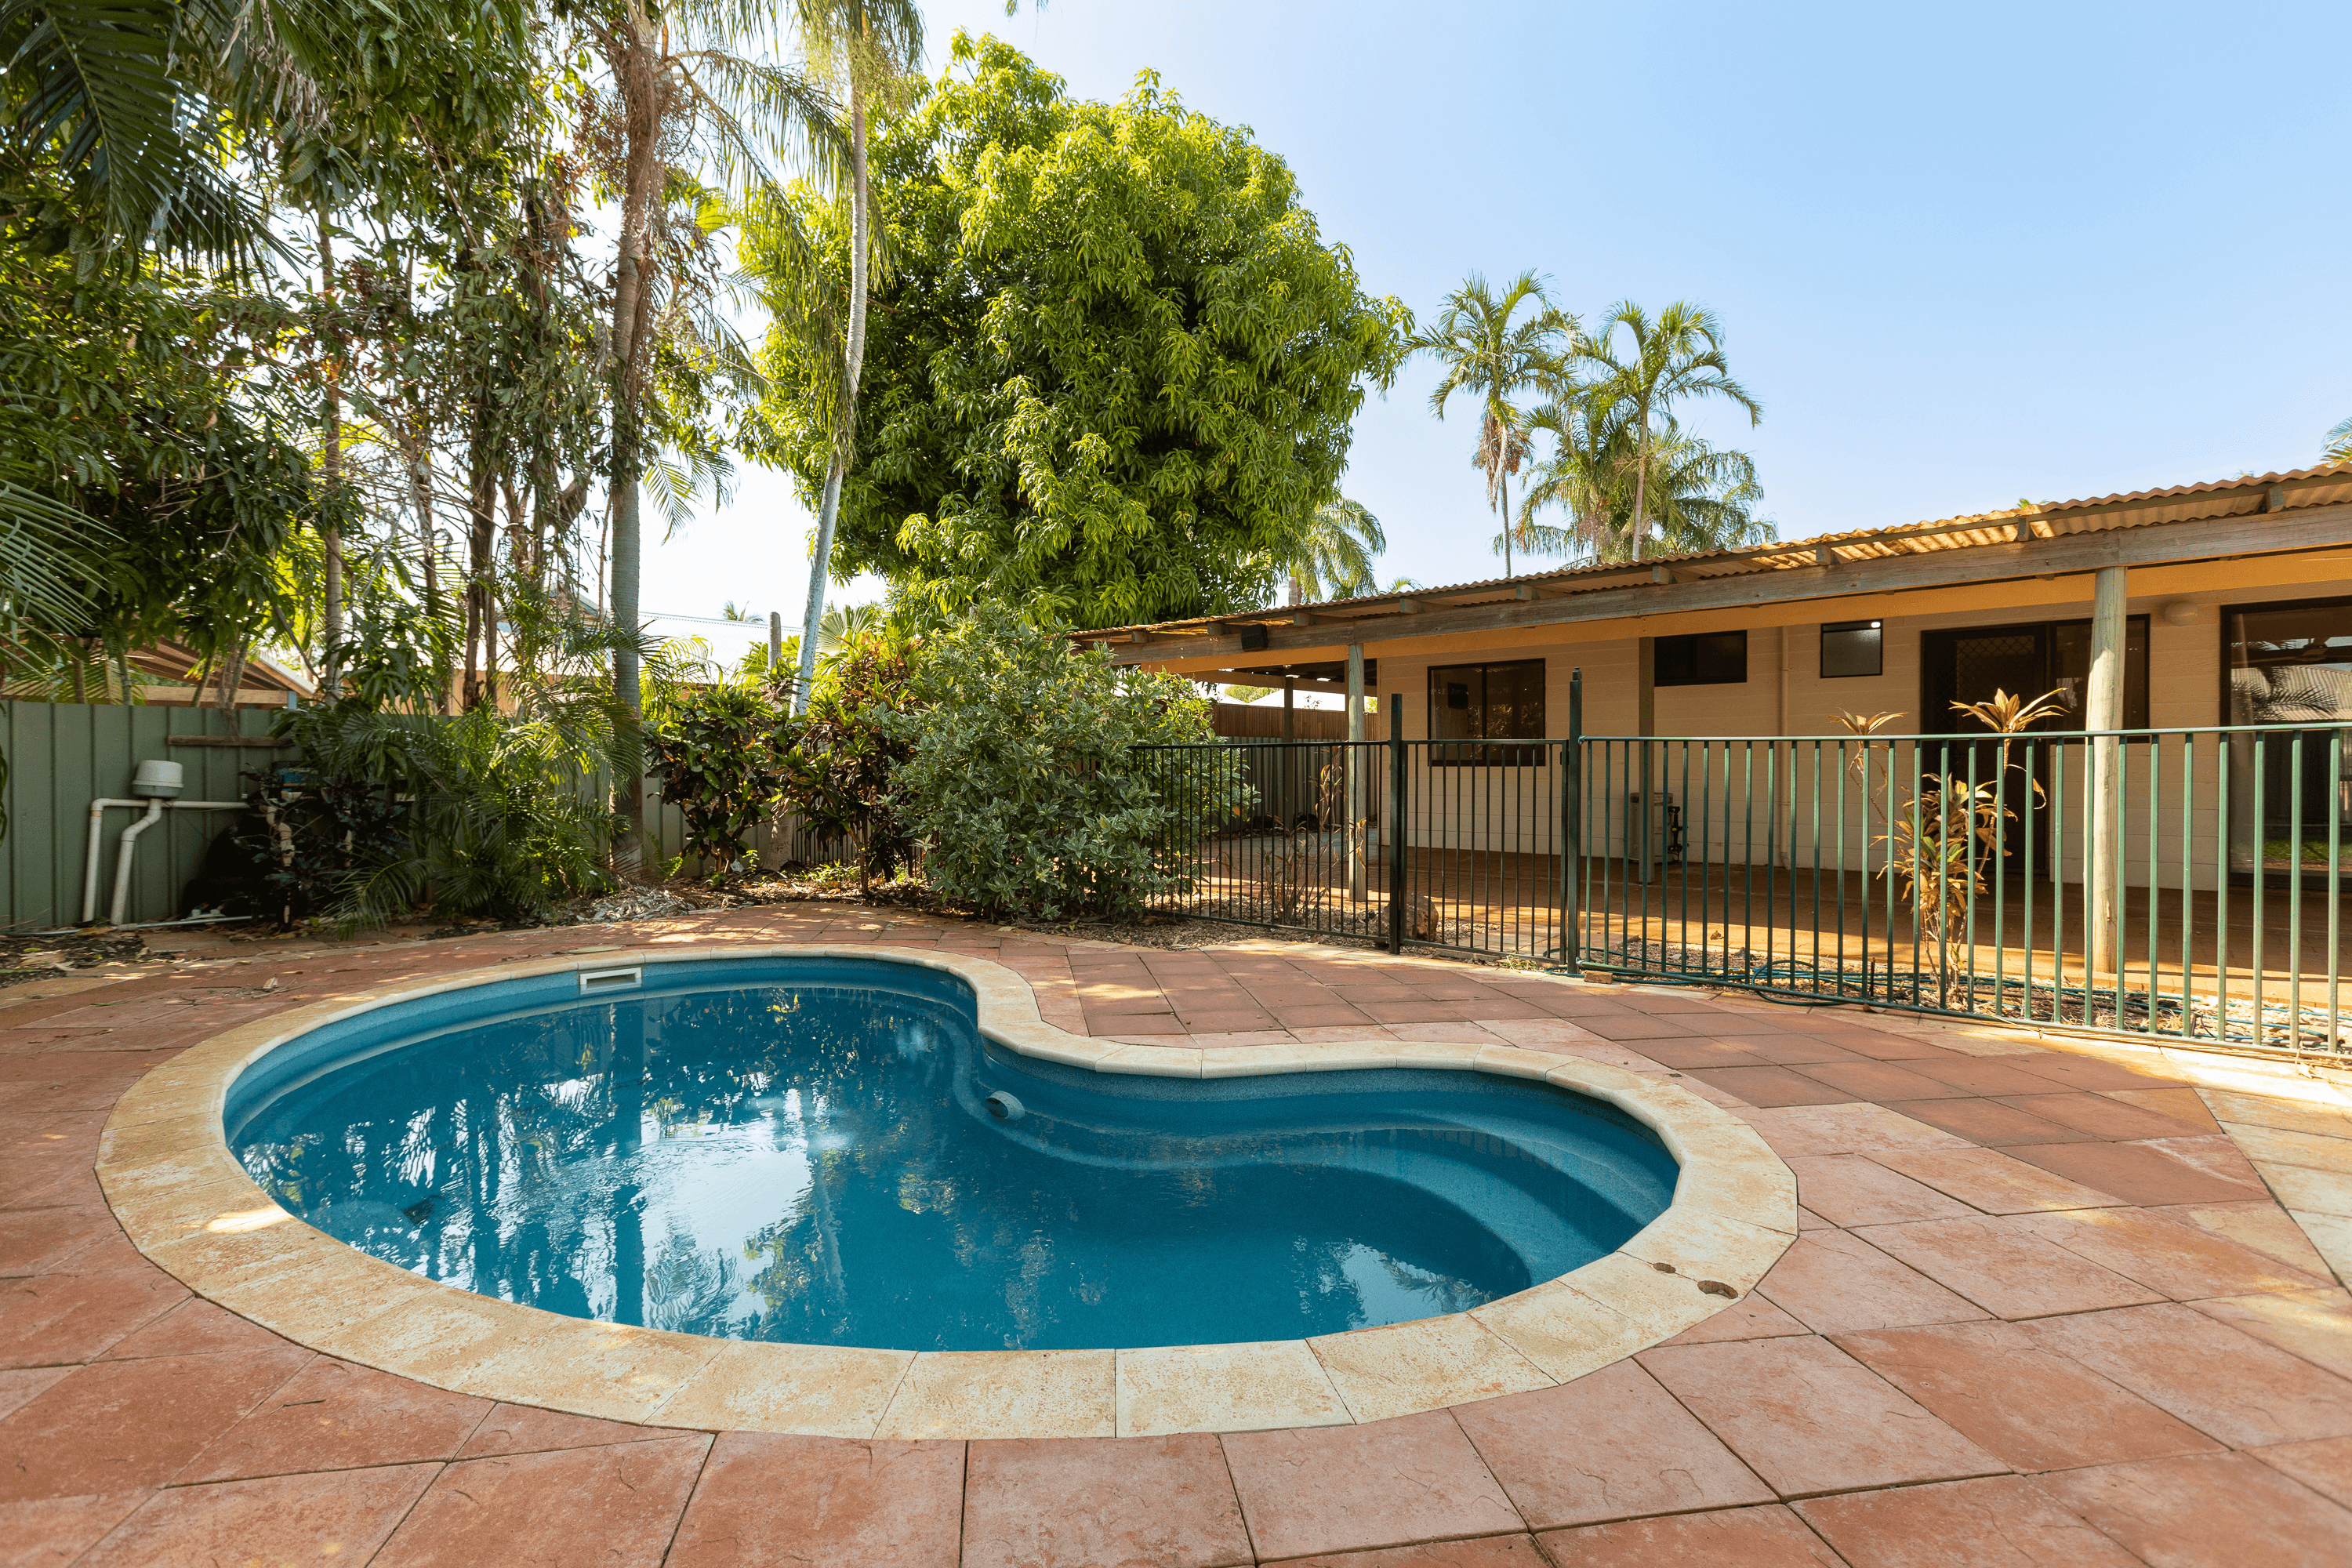 15 Biddles Place, CABLE BEACH, WA 6726